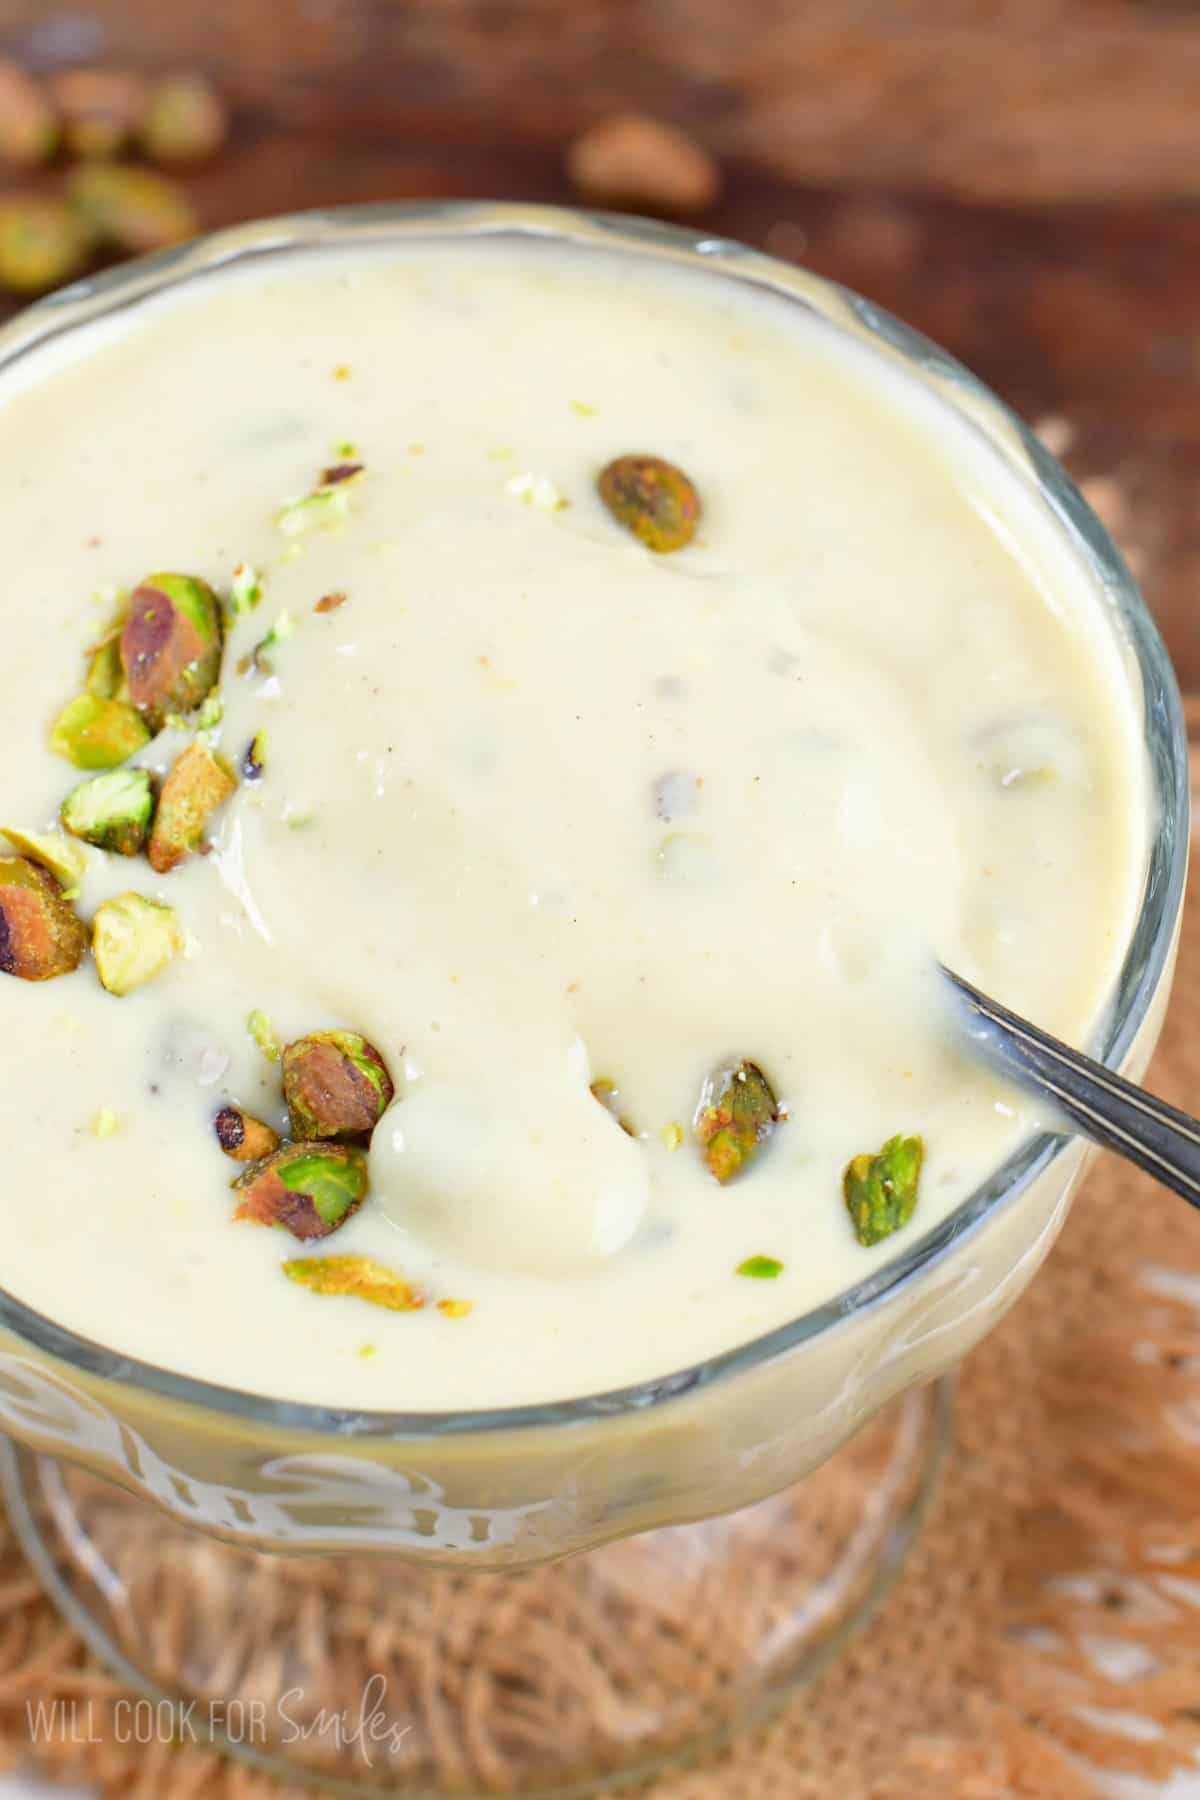 pistachio pudding in a bowl and a spoon starting to scoop some out.